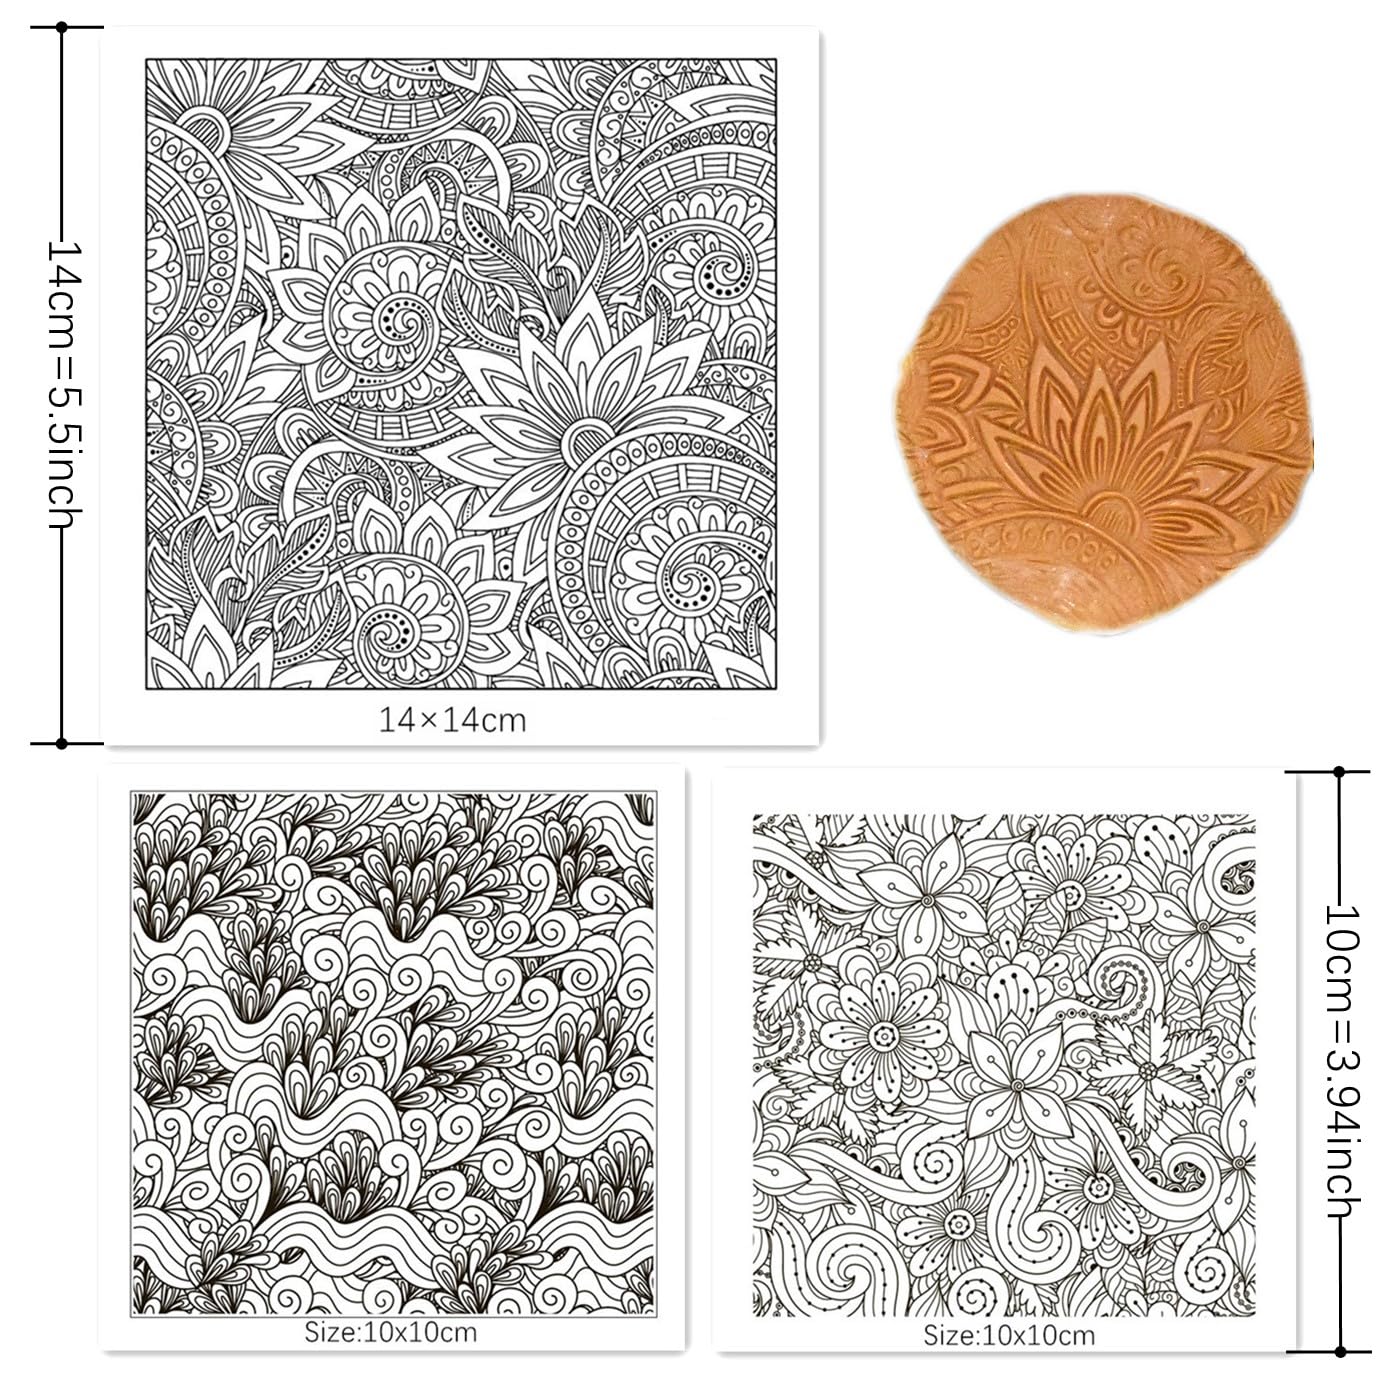 Premium Silicone Texture Stamp Sheets for Polymer Clay Jewelry and Clay Earrings - Set of 3 Floral and Unique Patterns - Easy to Use and Clean (Group 1)